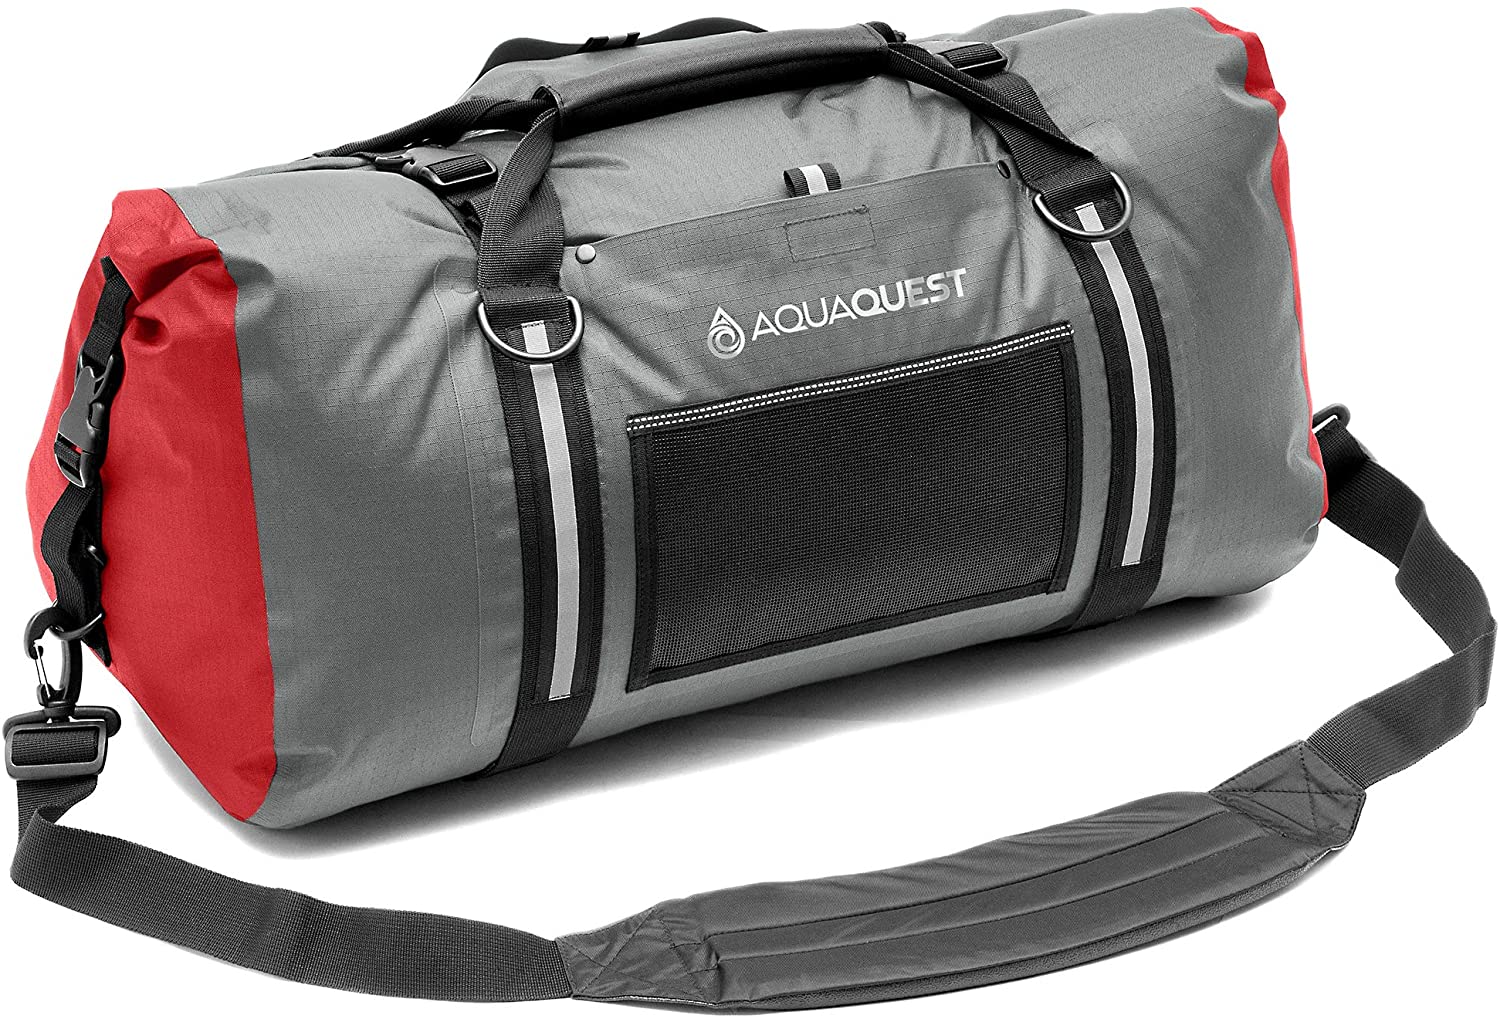 Aqua Quest White Water Duffel - 100% Waterproof, Heavy Duty, Versatile, Comfortable - Durable Protective Dry Bag for Travel, Sport, Motorcycle, Boat, Fishing - 50, 75, or 100 L